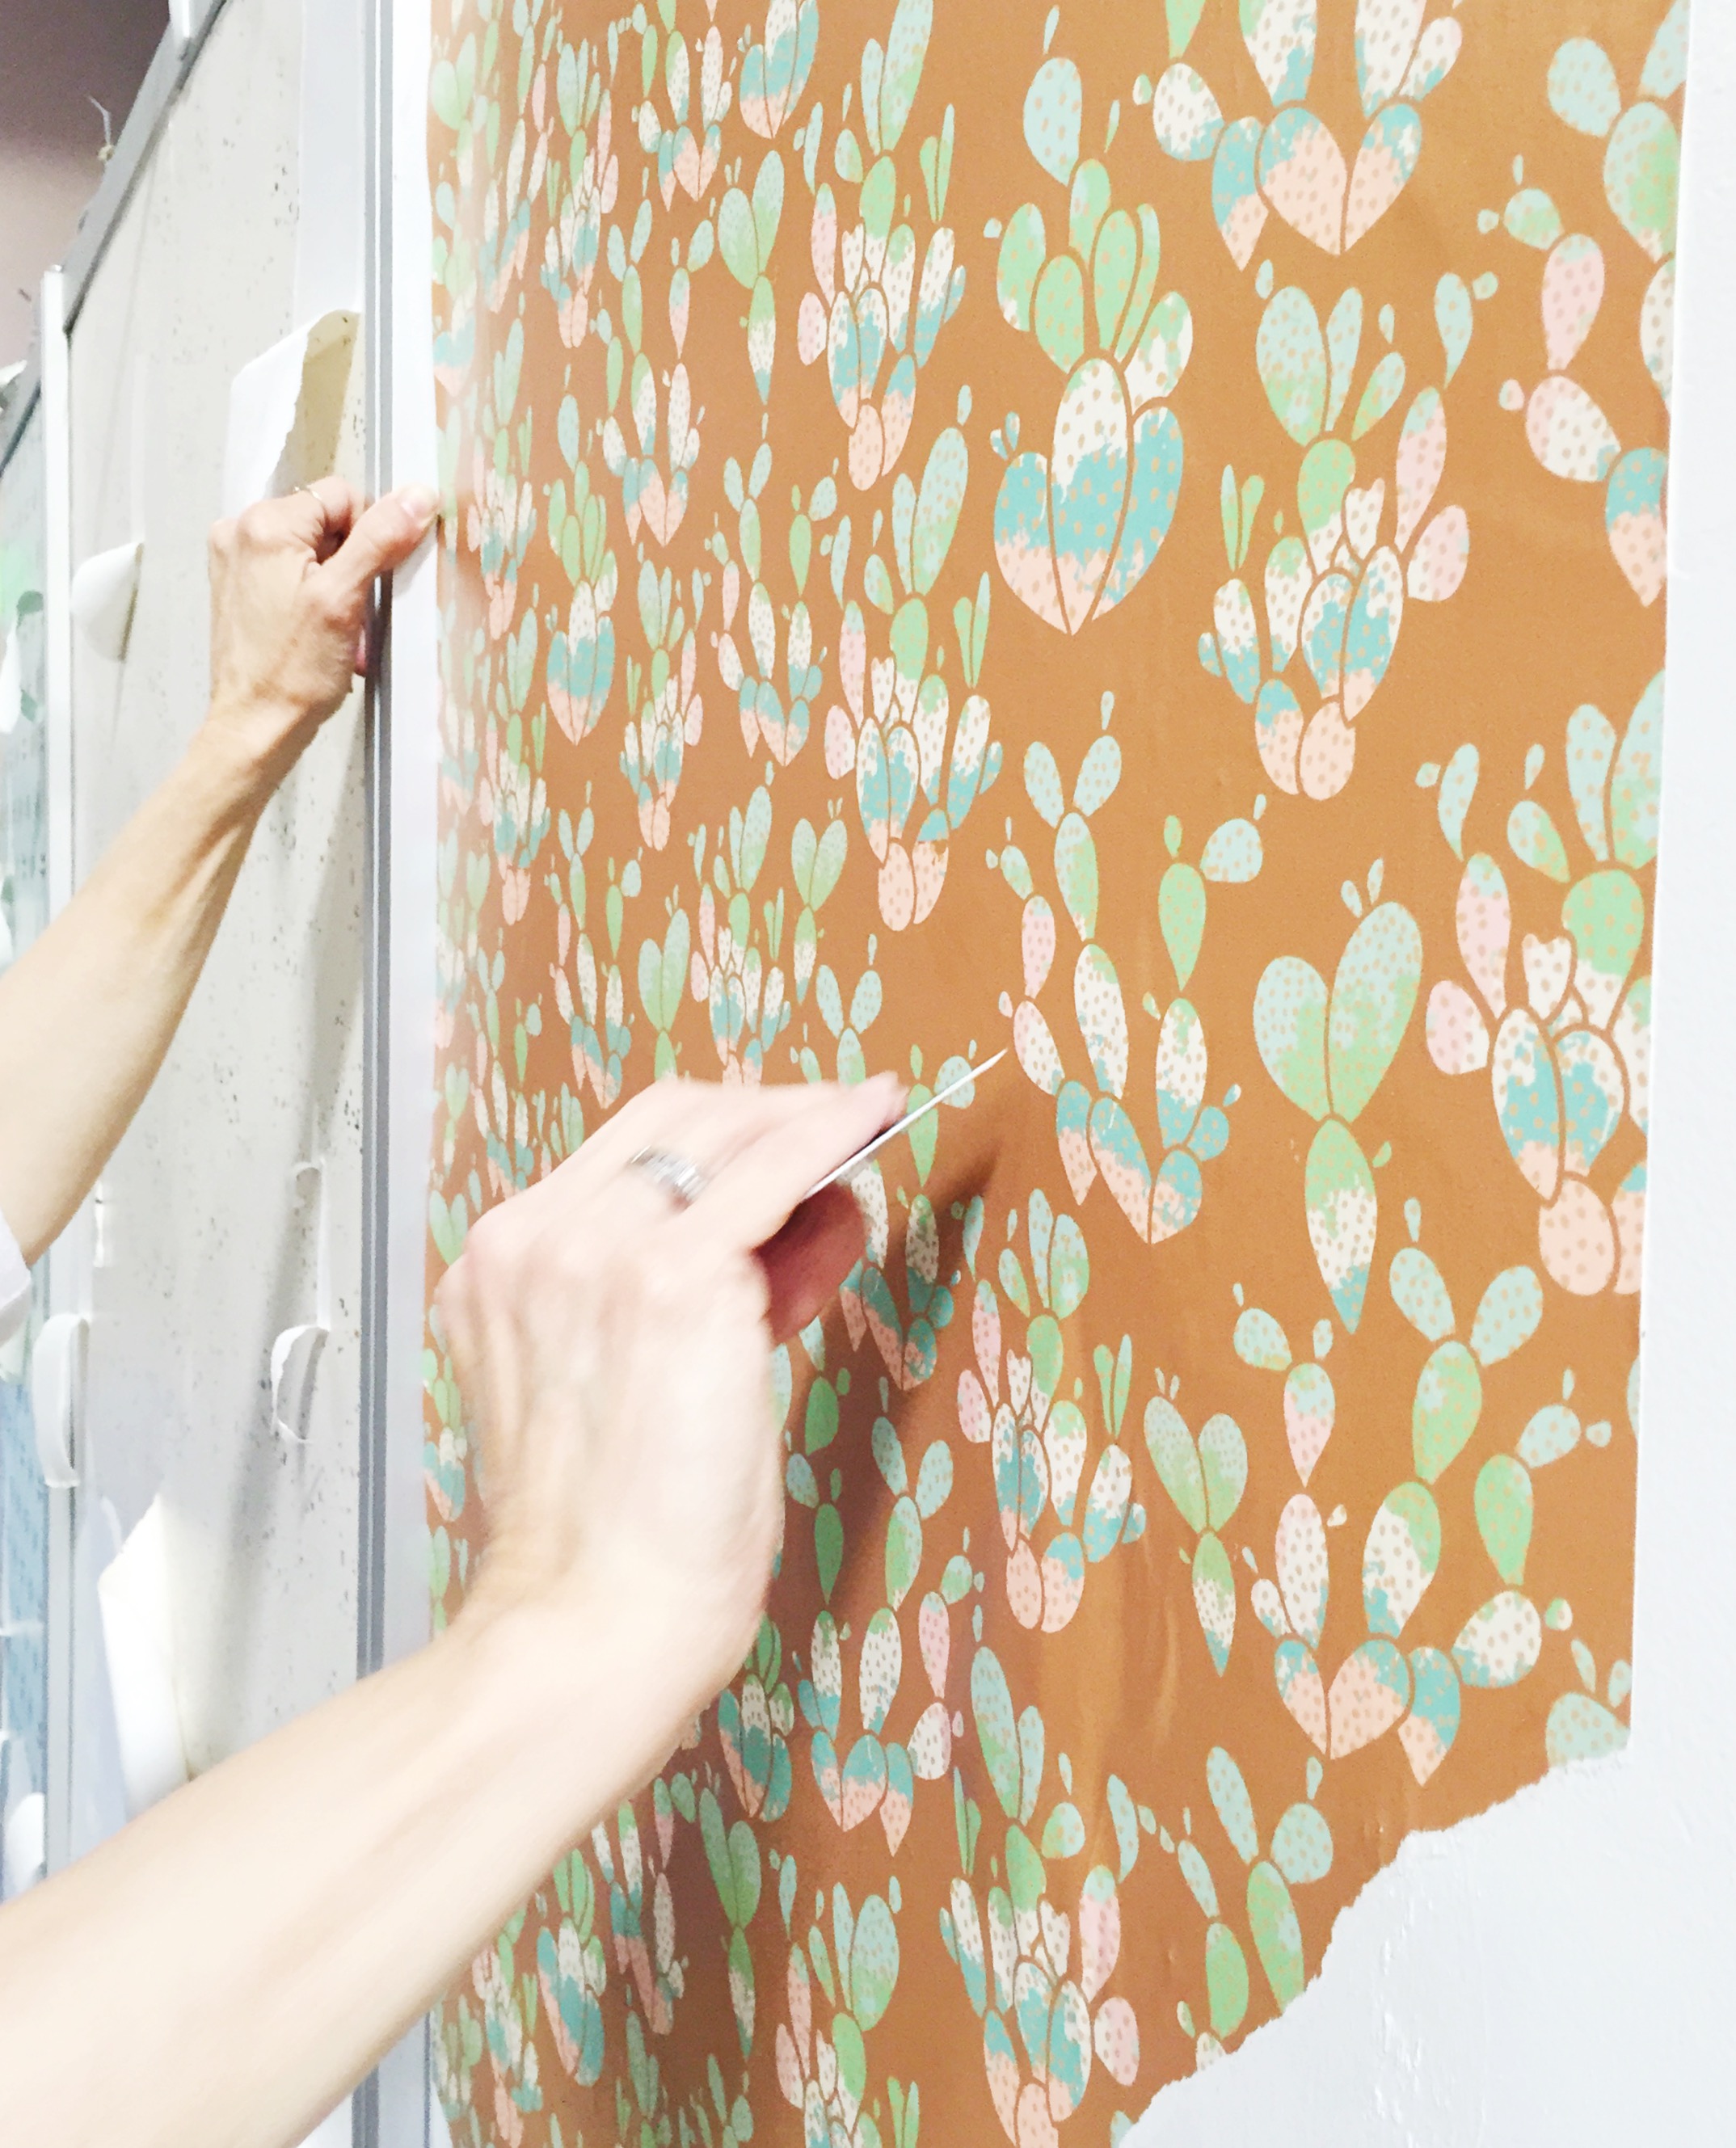 Enter To Win Rolls Of Smooth Wallpaper A Value Design